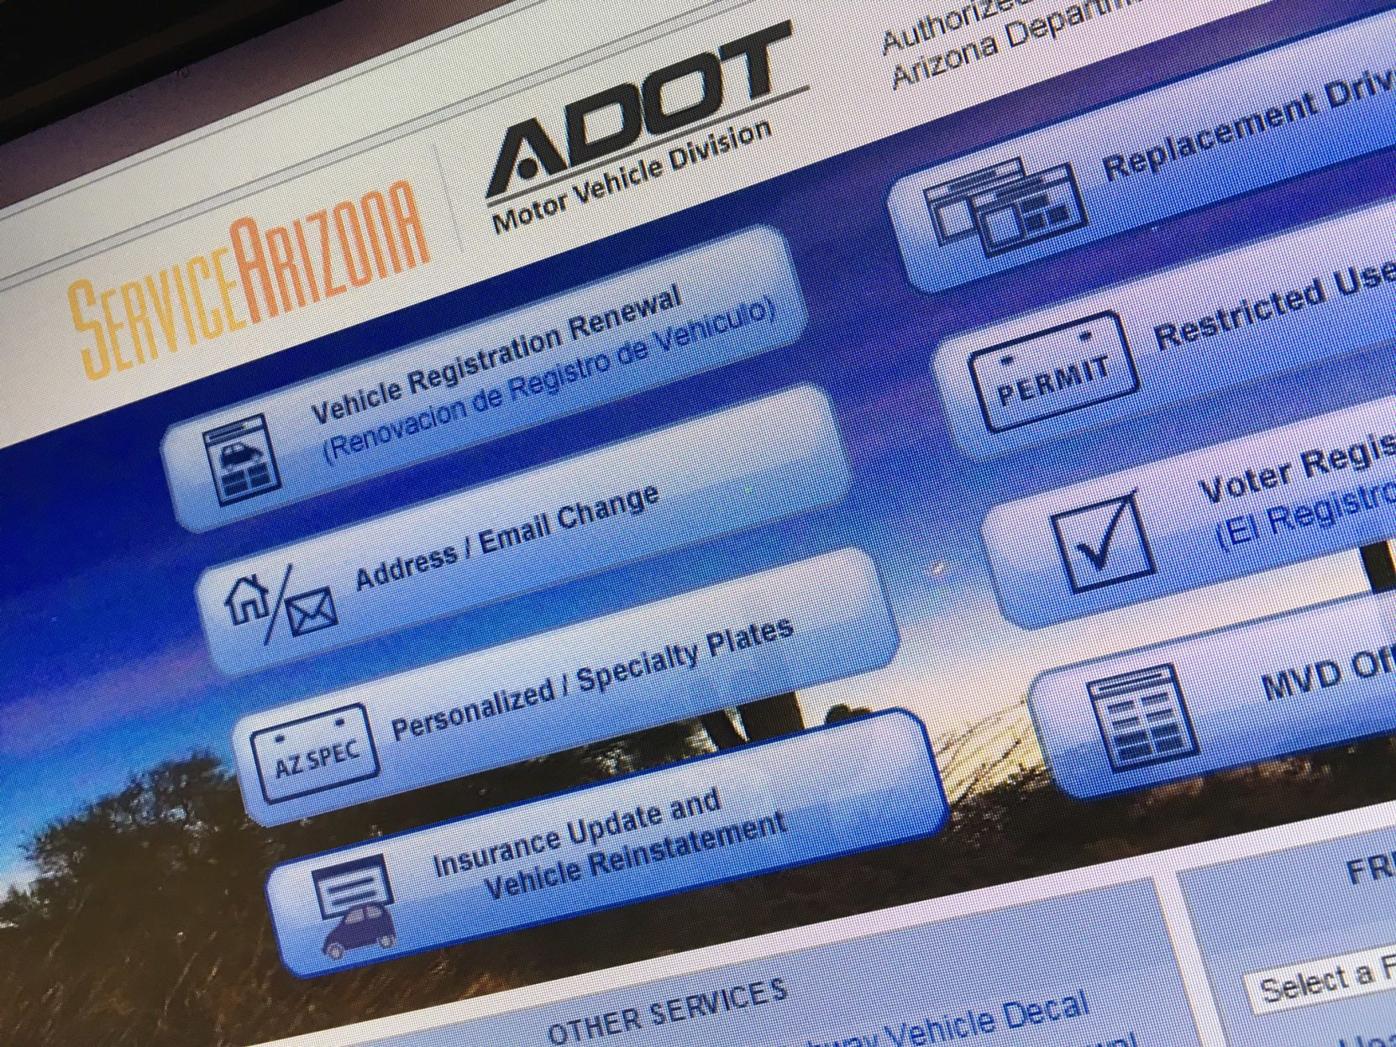 ADOT Adds To MVD Customer Services Available Through Live Chat